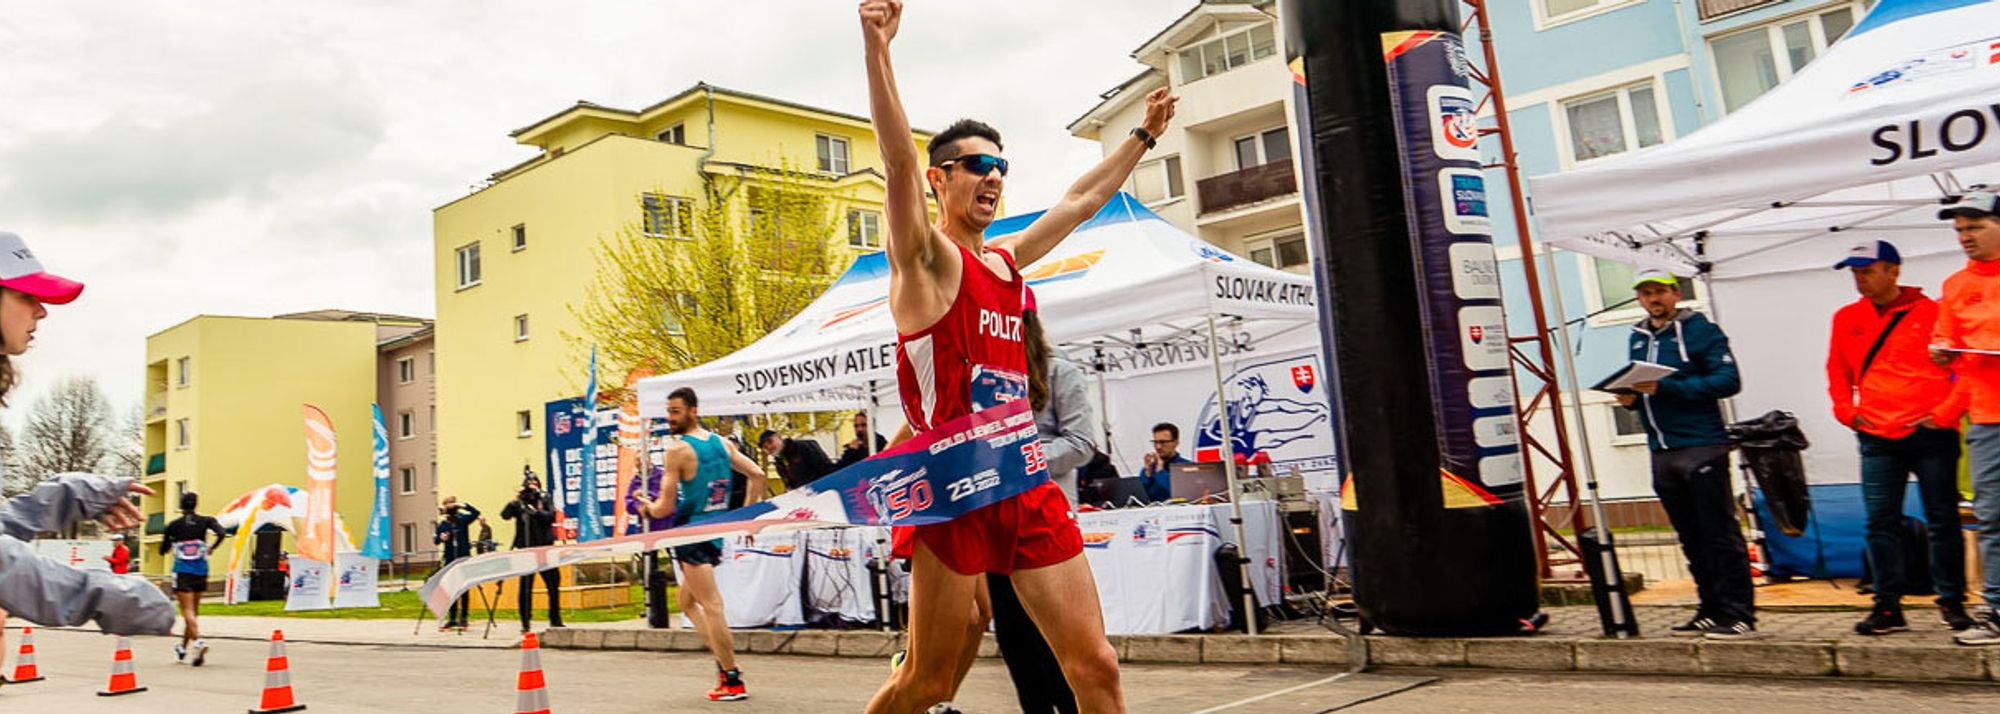 The latest stop in the Gold series of the World Athletics Race Walking Tour is the European Race Walking Team Championships in Podebrady